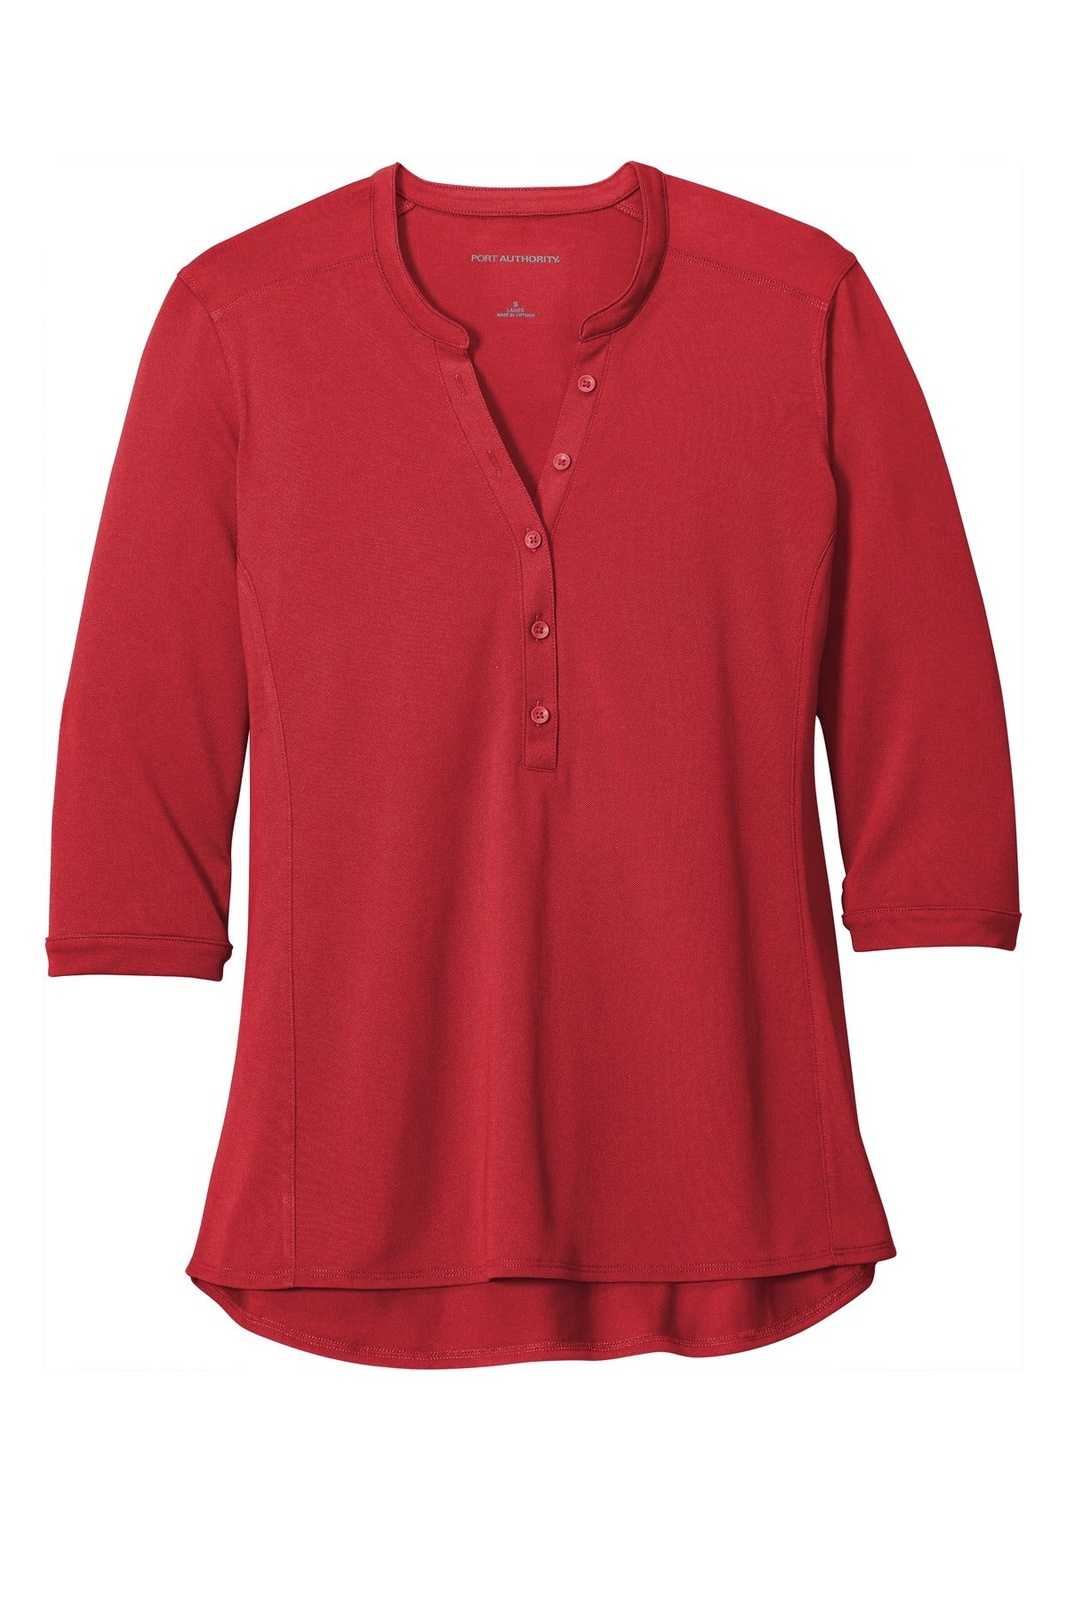 Port Authority LK750 Ladies UV Choice Pique Henley - Rich Red - HIT a Double - 5